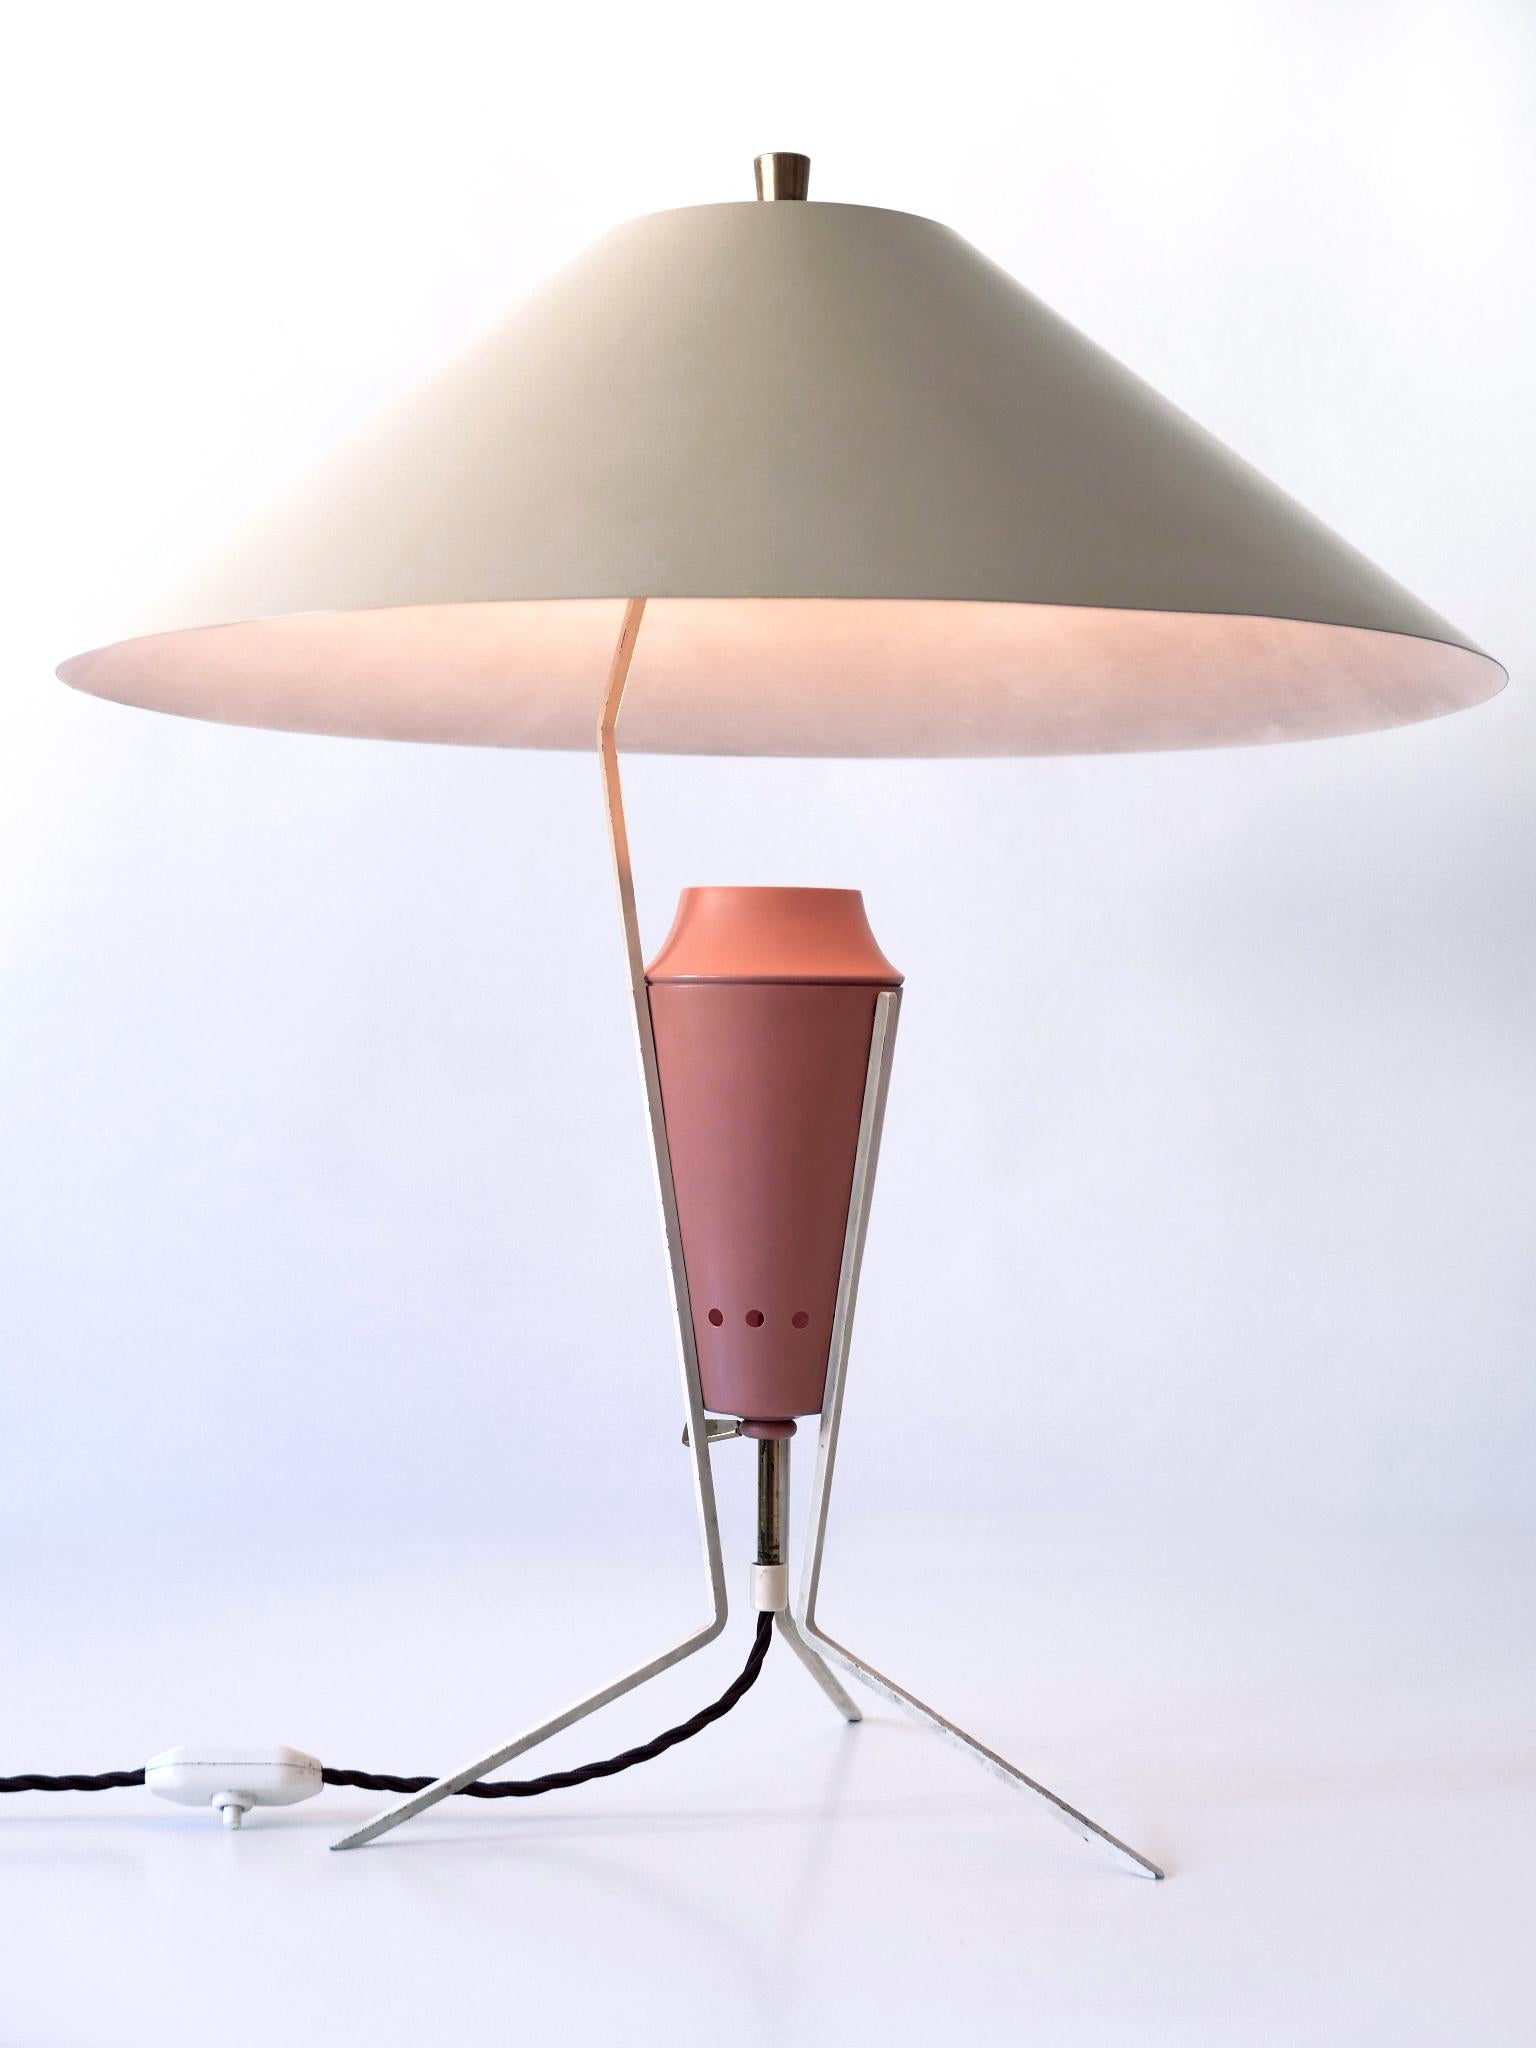 Exceptional Large & Elegant Mid Century Modern Table Lamp Germany 1950s For Sale 4